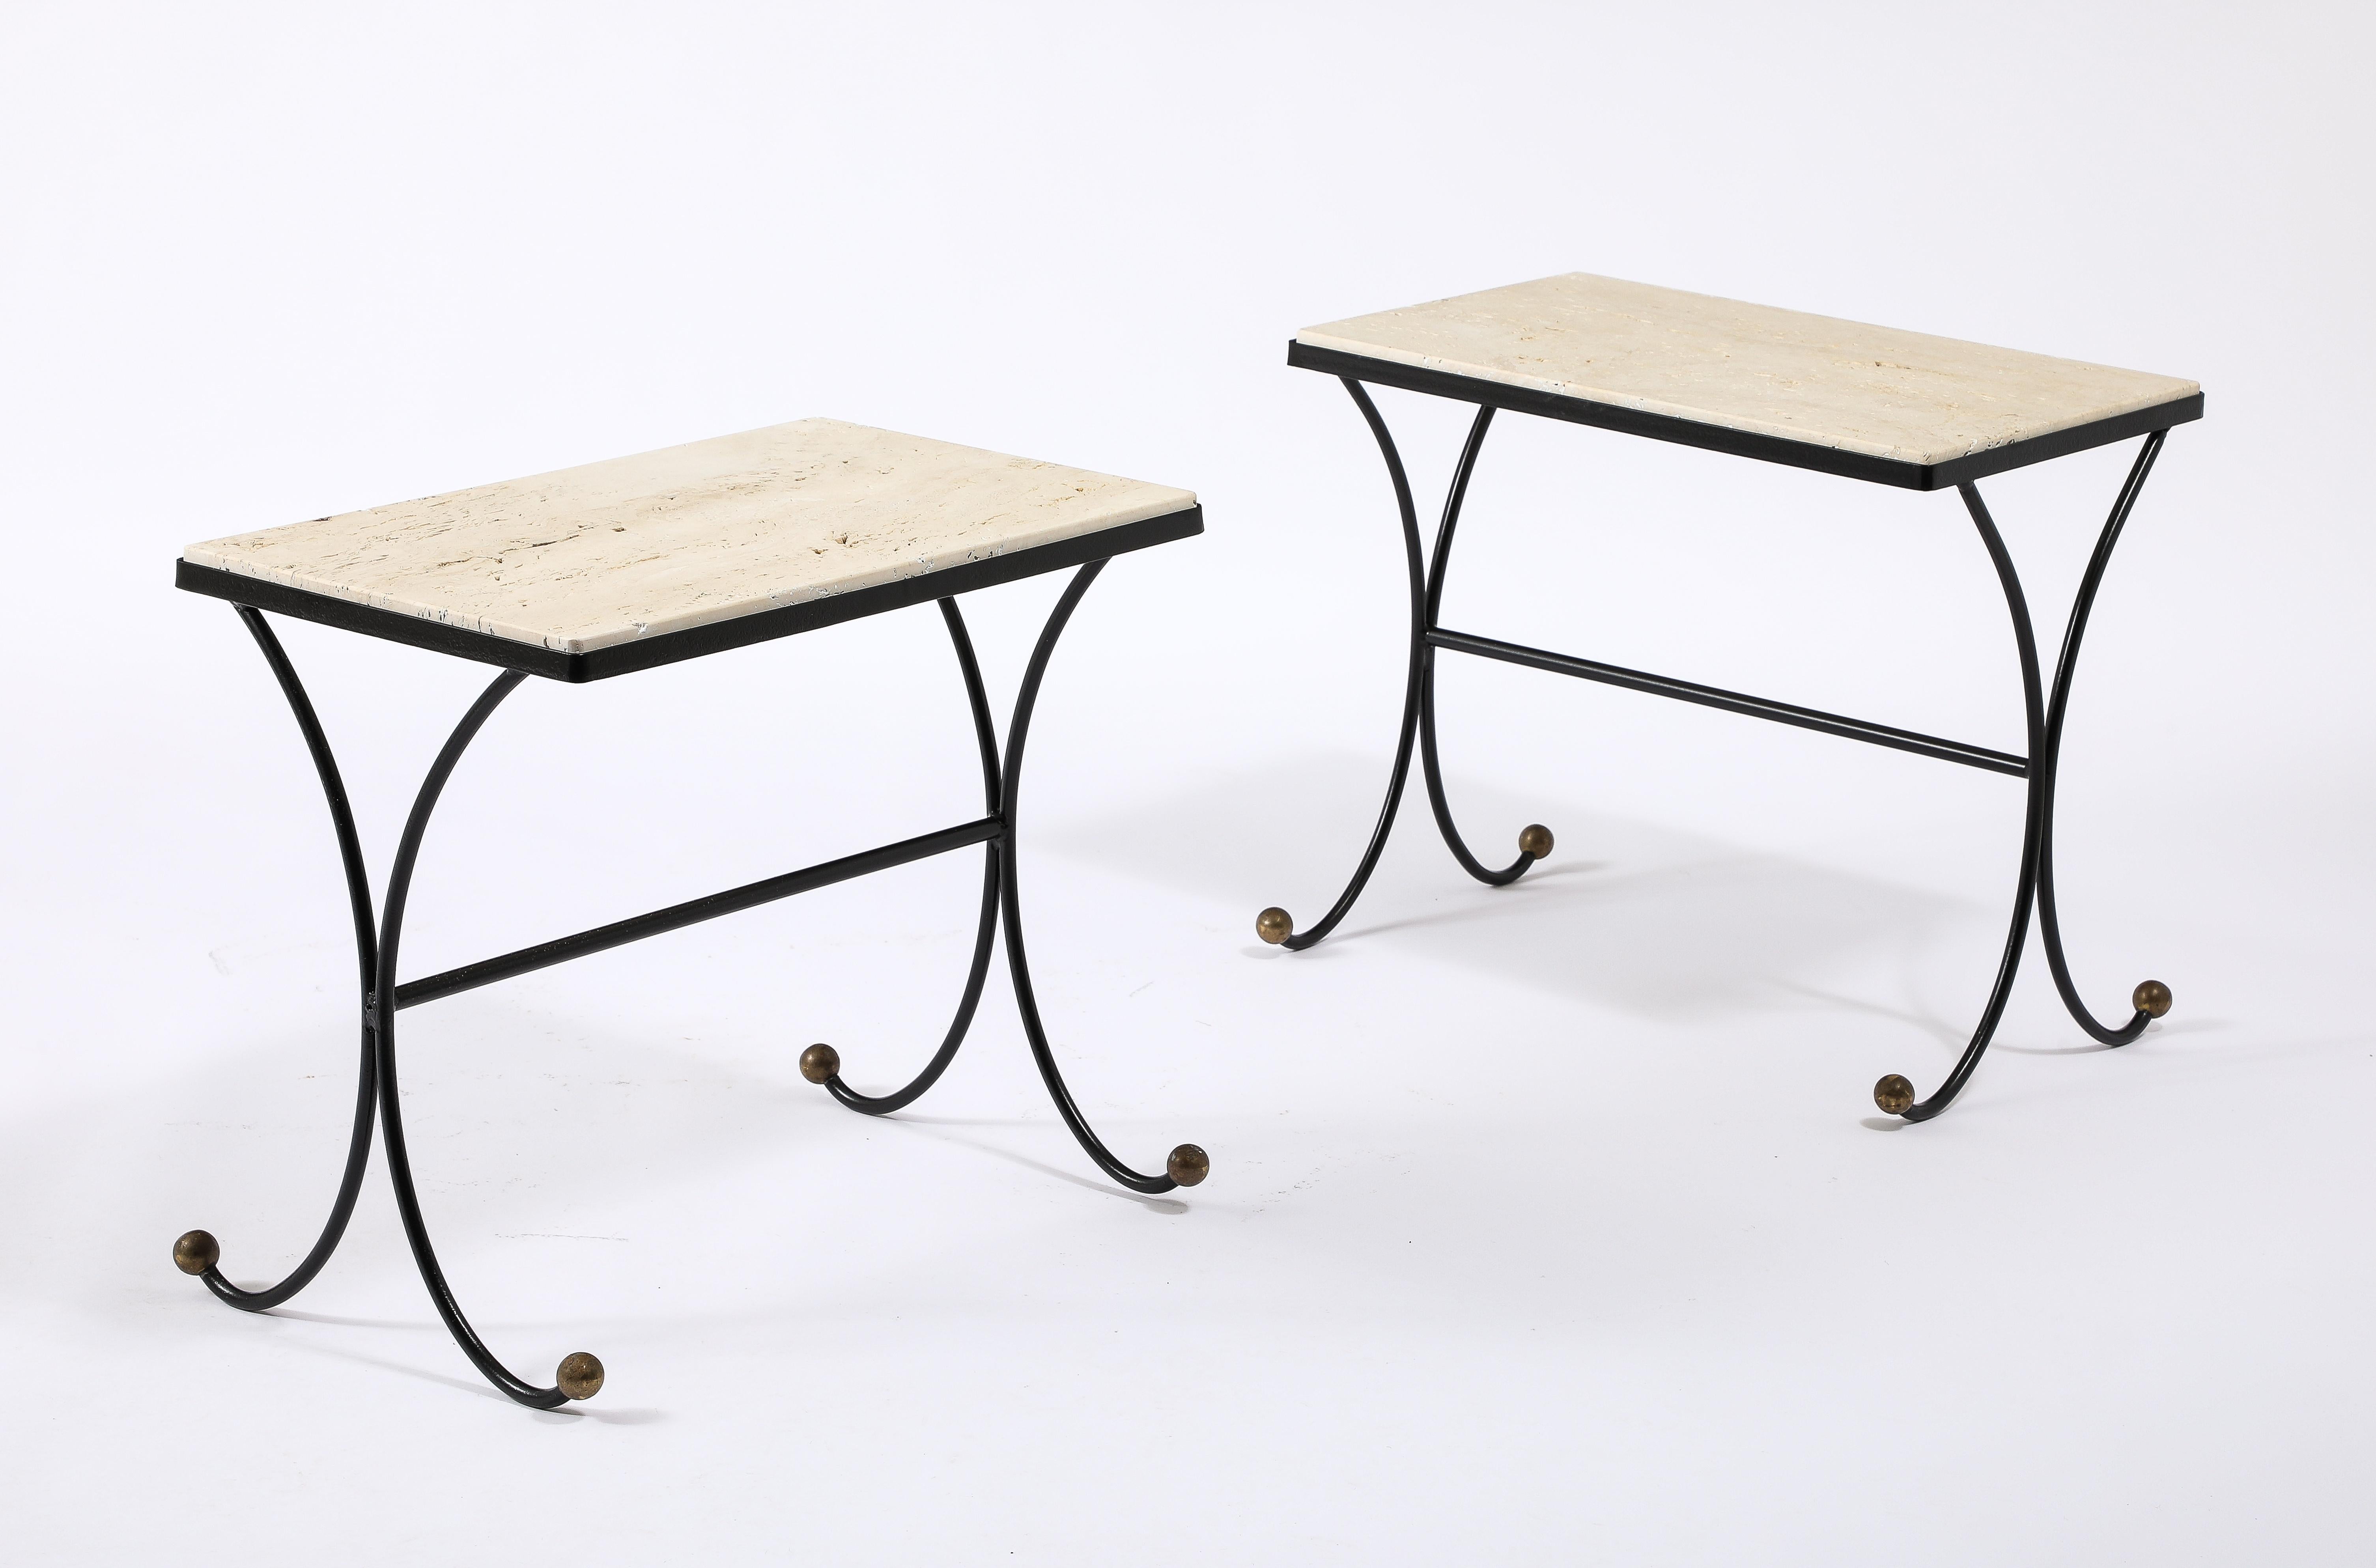 Pair of elegant brass, wrought iron and travertine end tables.
